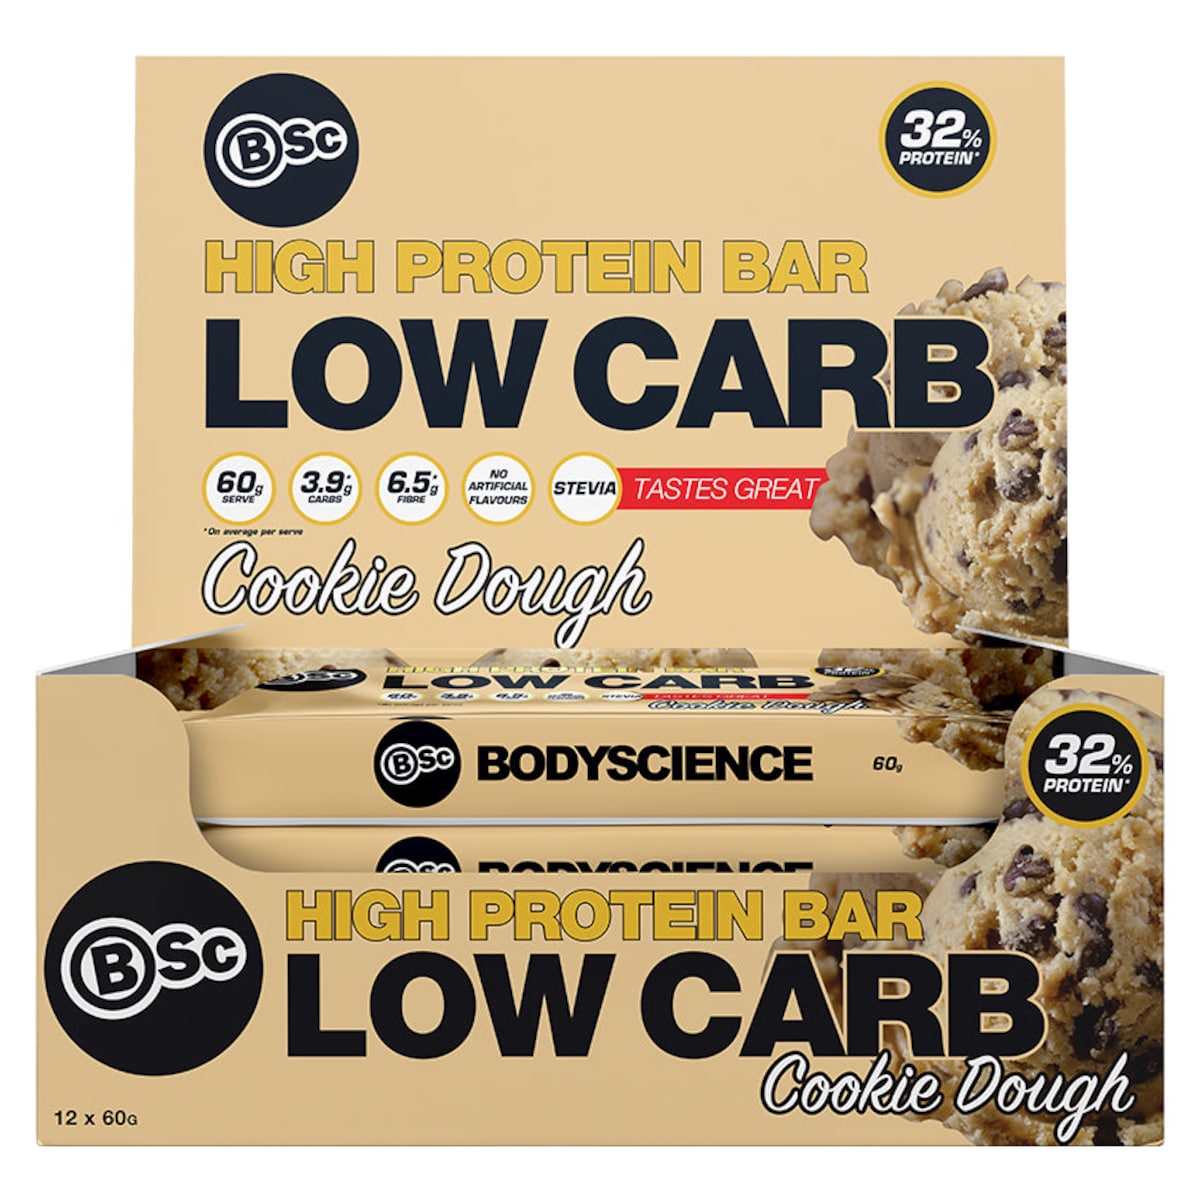 BSc Body Science High Protein Low Carb Bar Cookie Dough 12 x 60g Australia